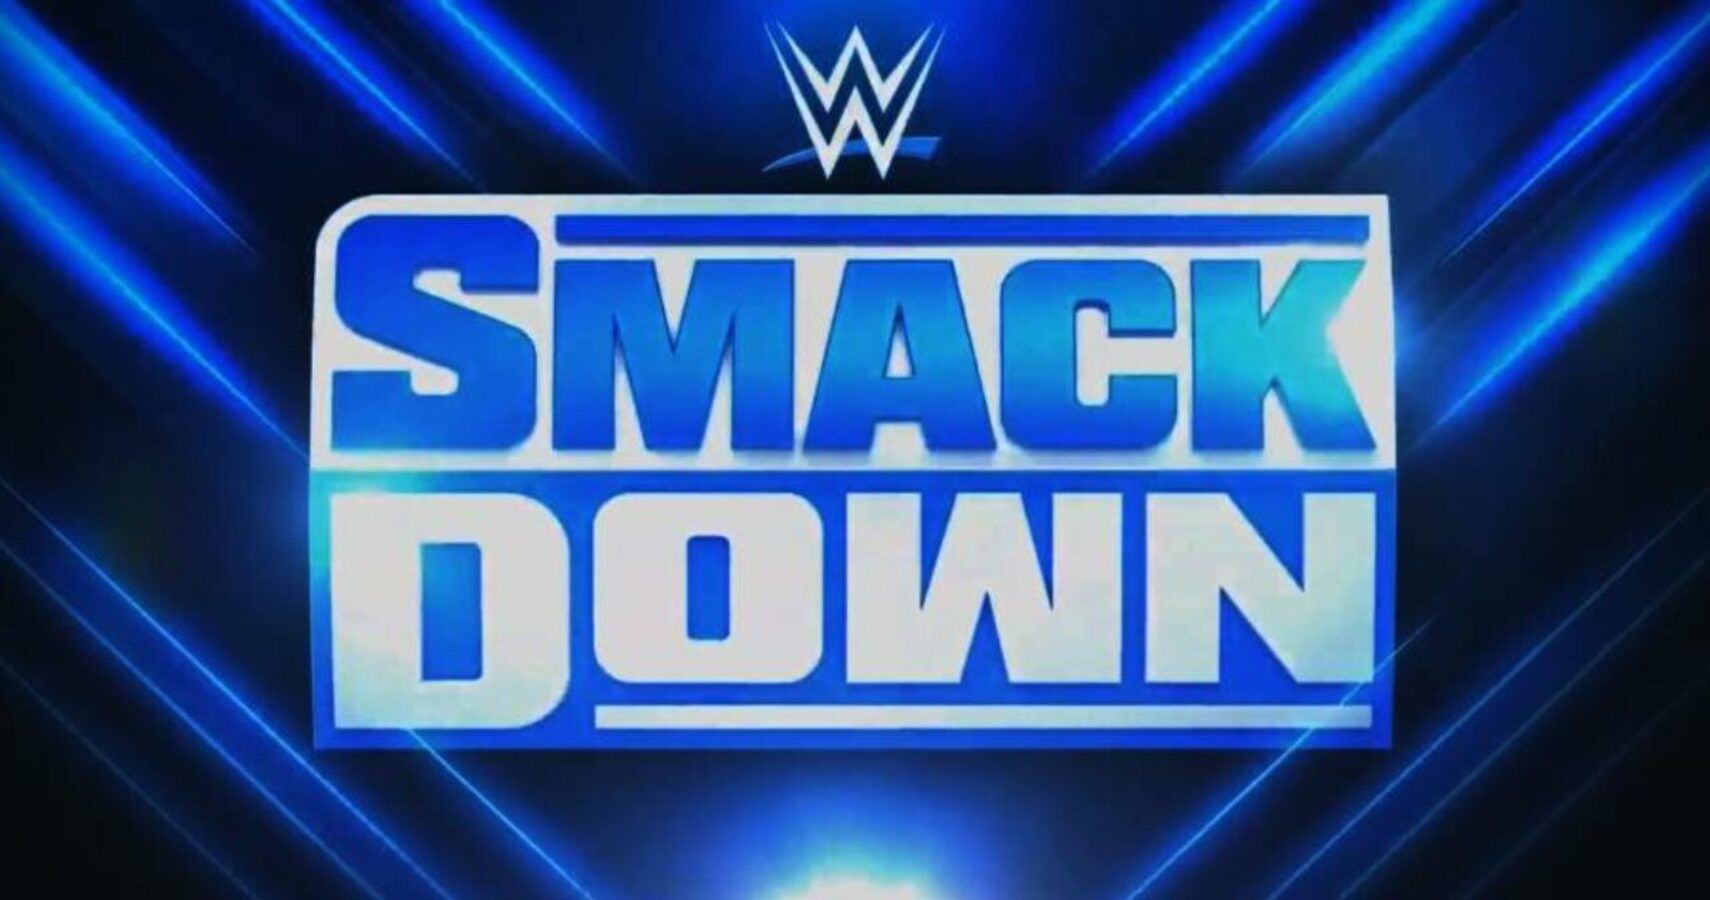 Ratings Decreased For SmackDown Live Episode Following Survivor Series